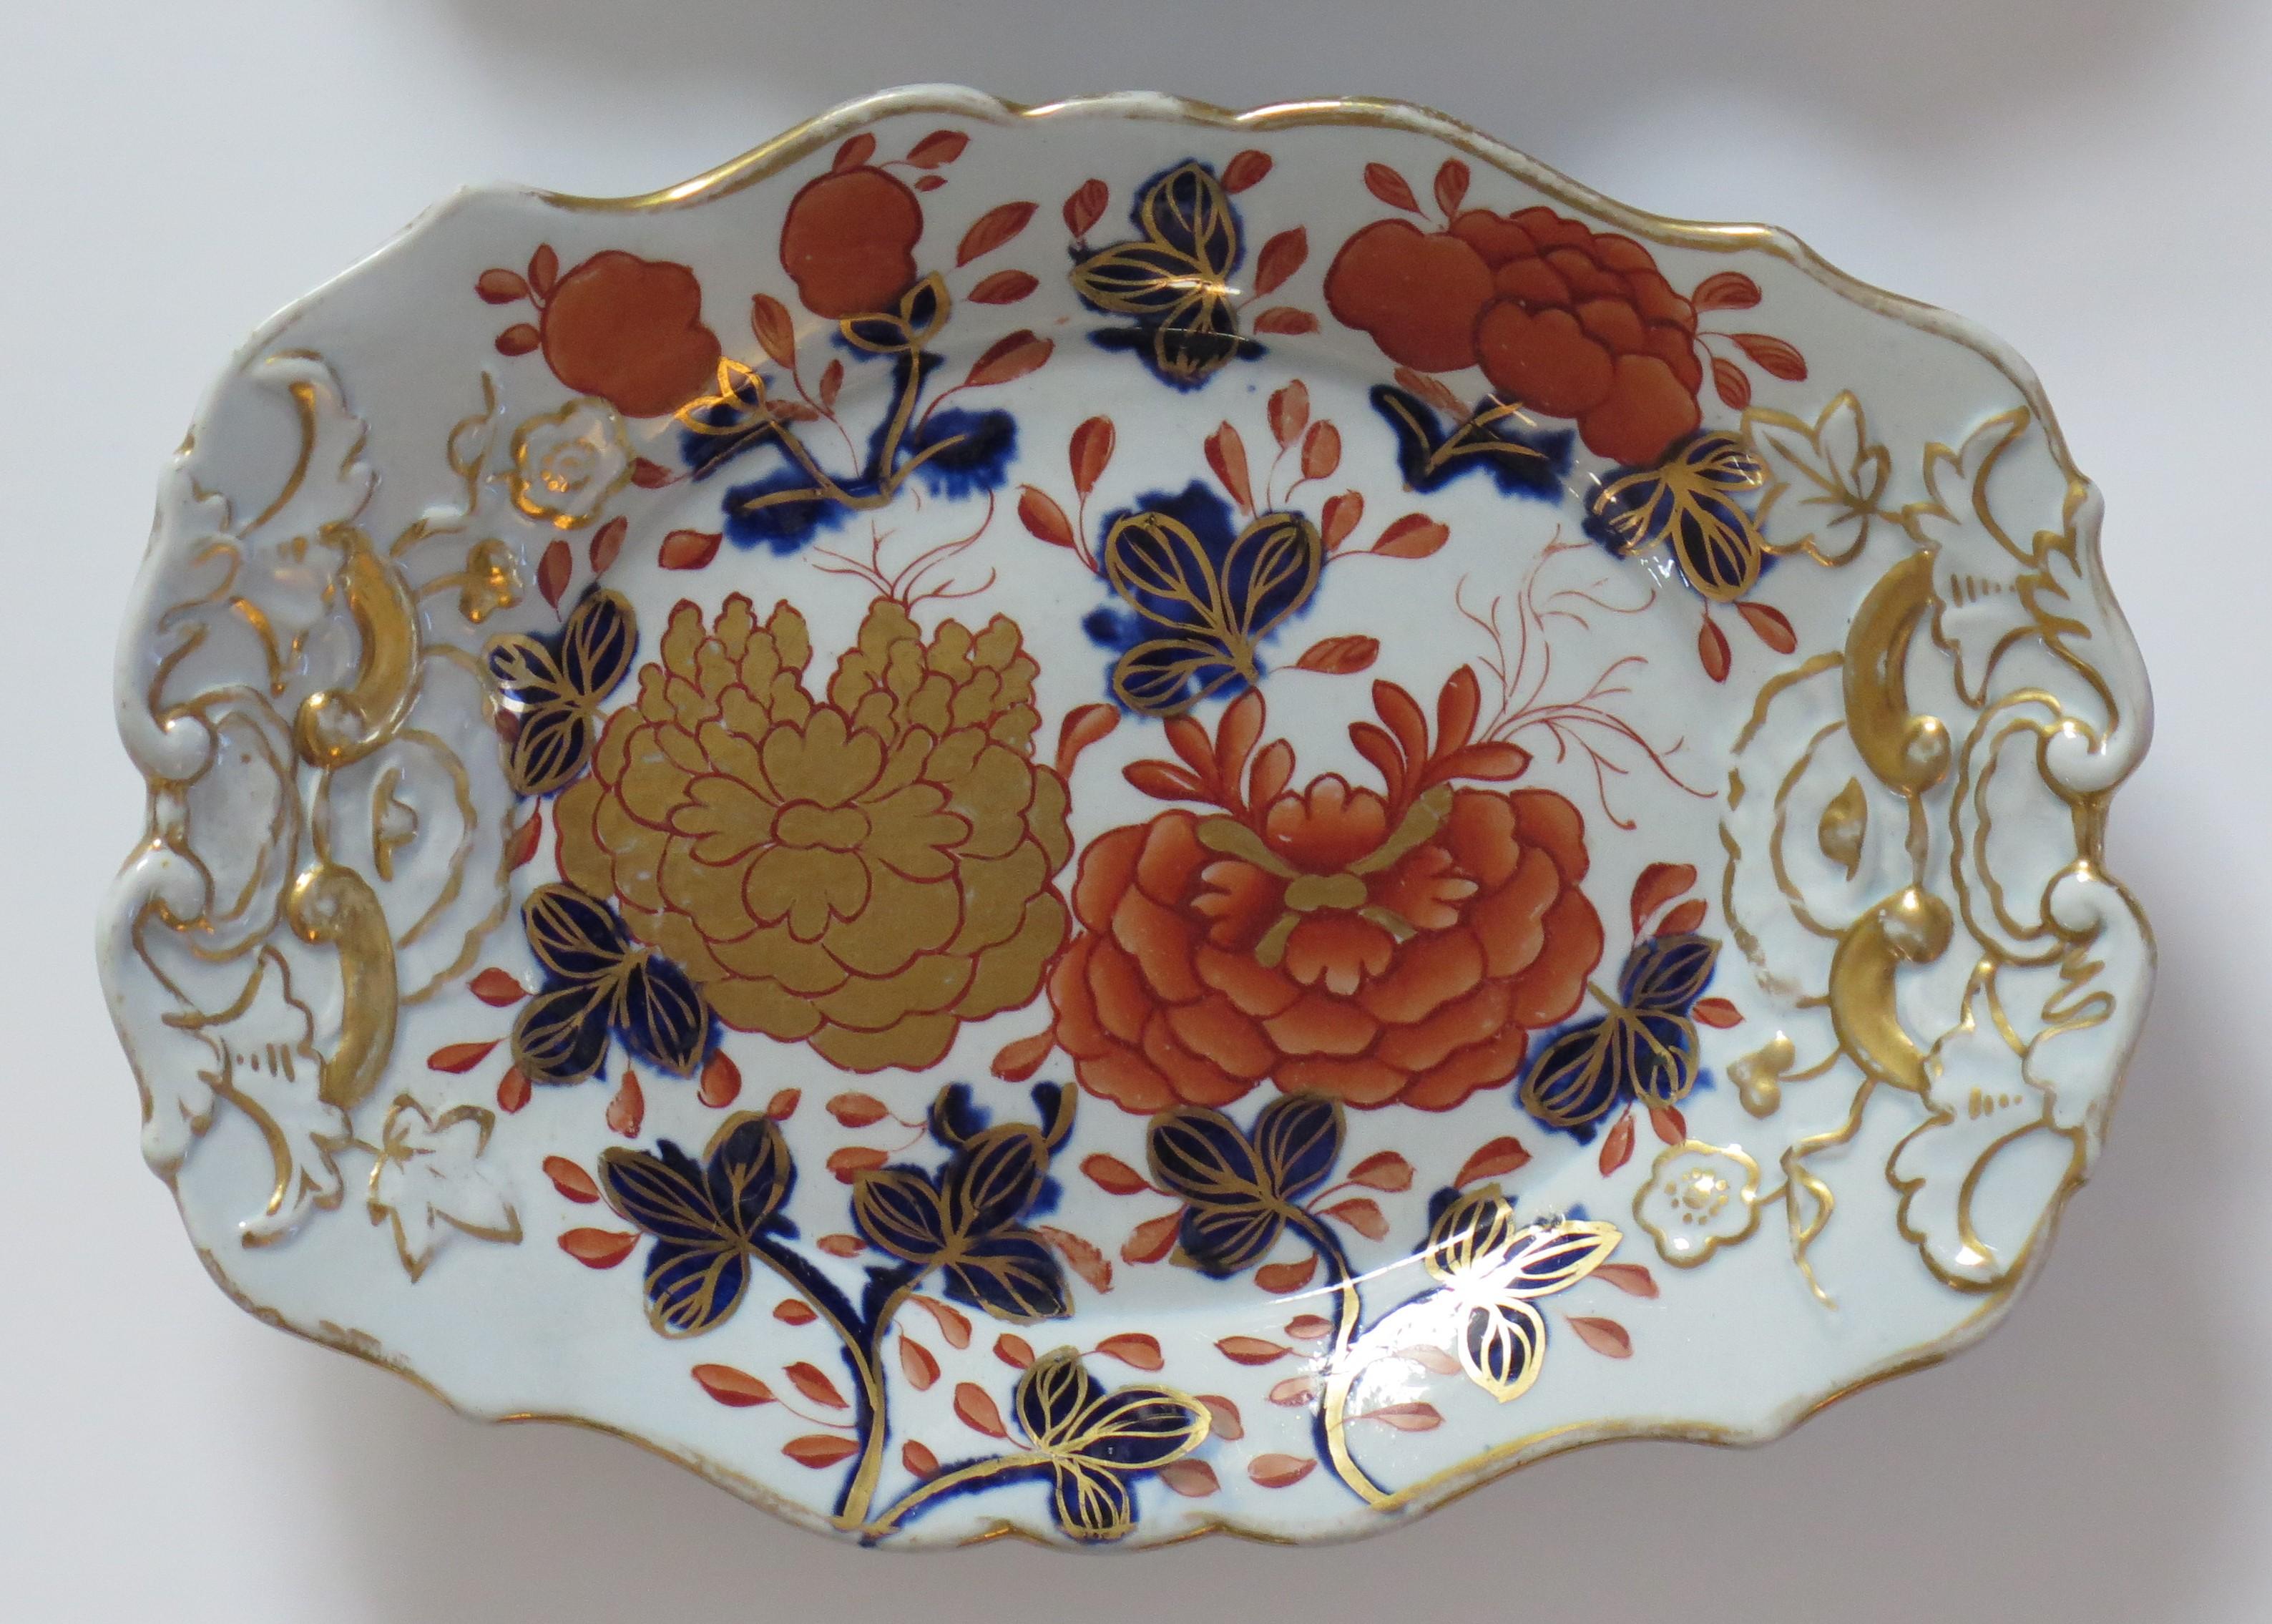 This is a finely hand painted PAIR of Mason's ironstone sweetmeat or desert dishes in the rare pattern called 